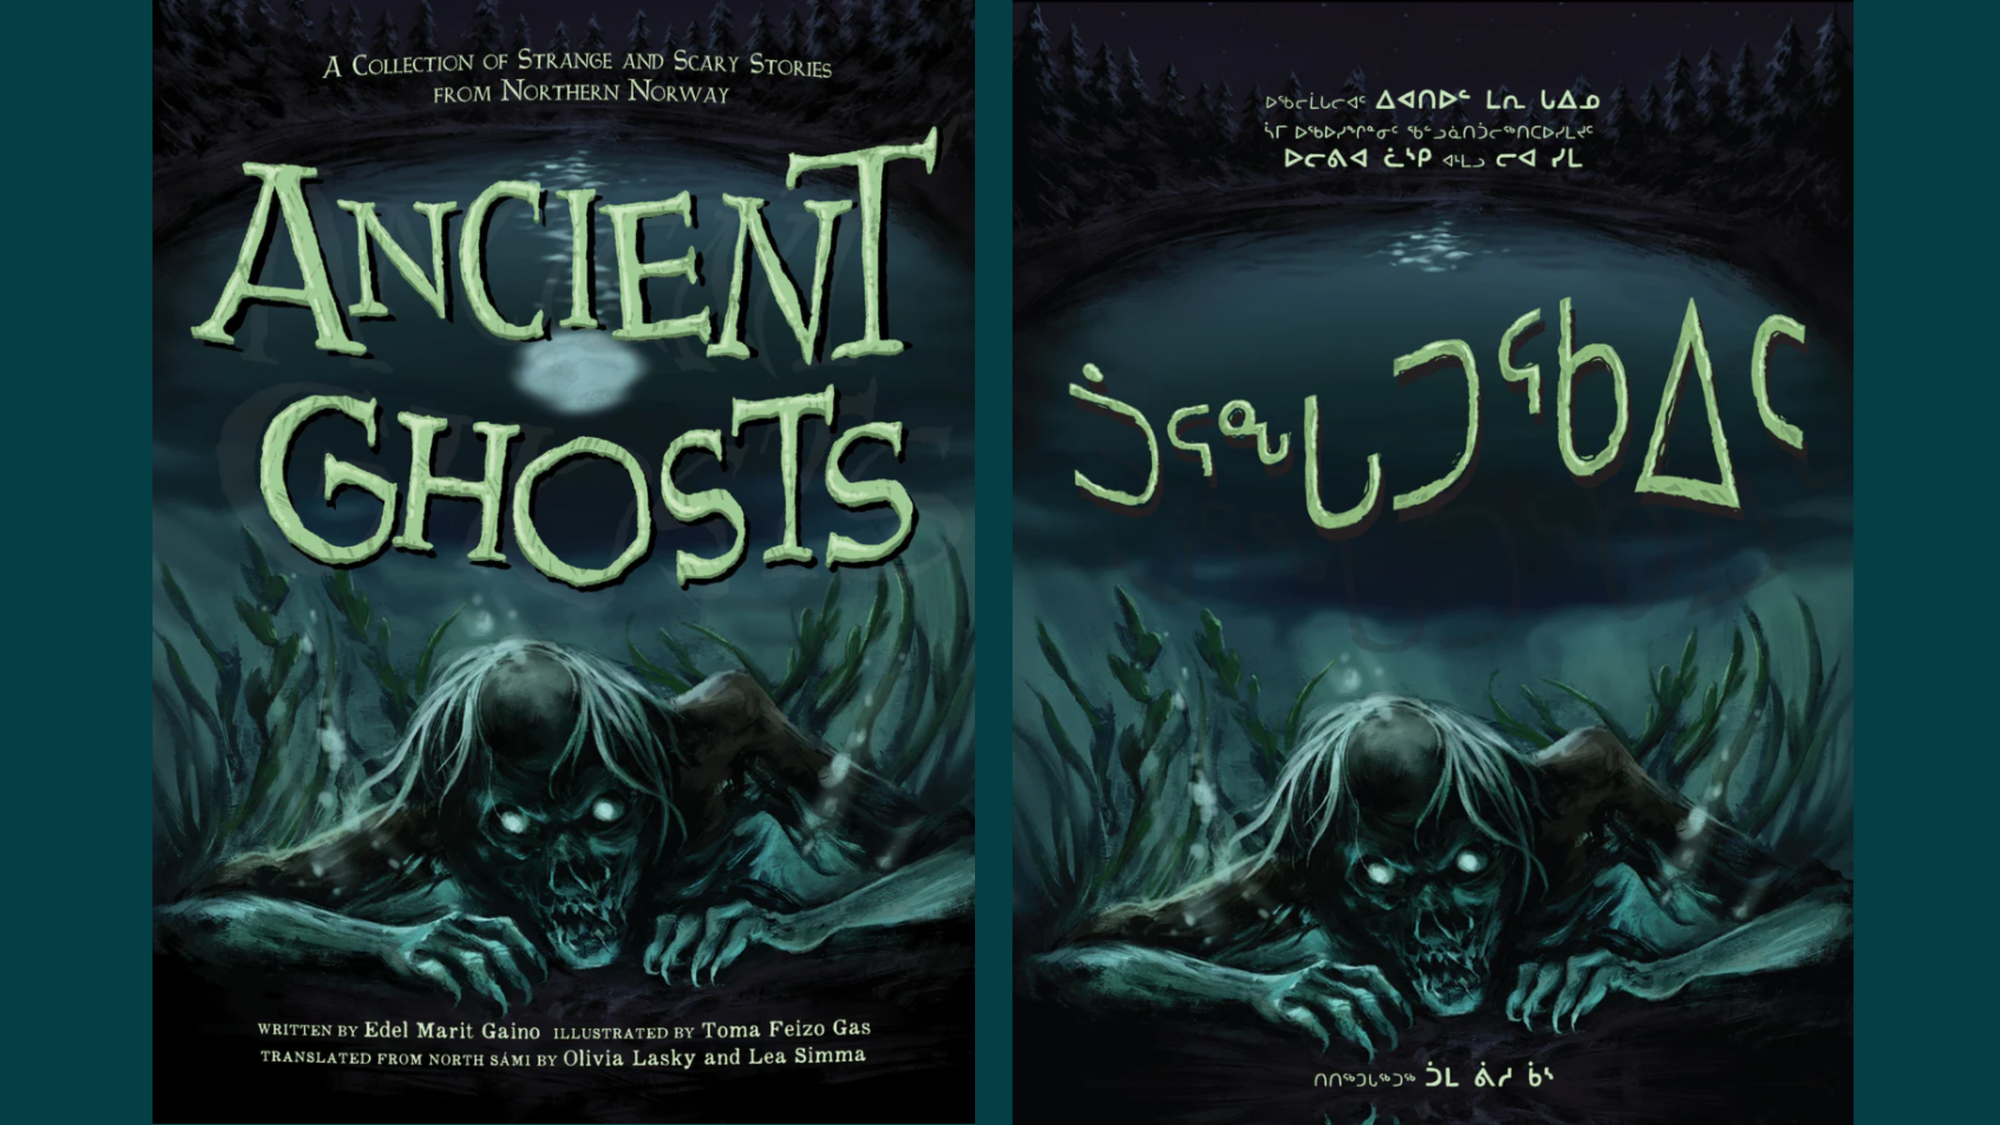 Two book covers with identical illustrations: one in English "Ancient Ghosts: A collection of strange and scary stories from Northern Norway" and one in the language Inuktitut.
The illustration is in dark colours, with a scary ghost, perhaps a zombie, creeping up from the depths of a lake. The moon is mirrored in the water.